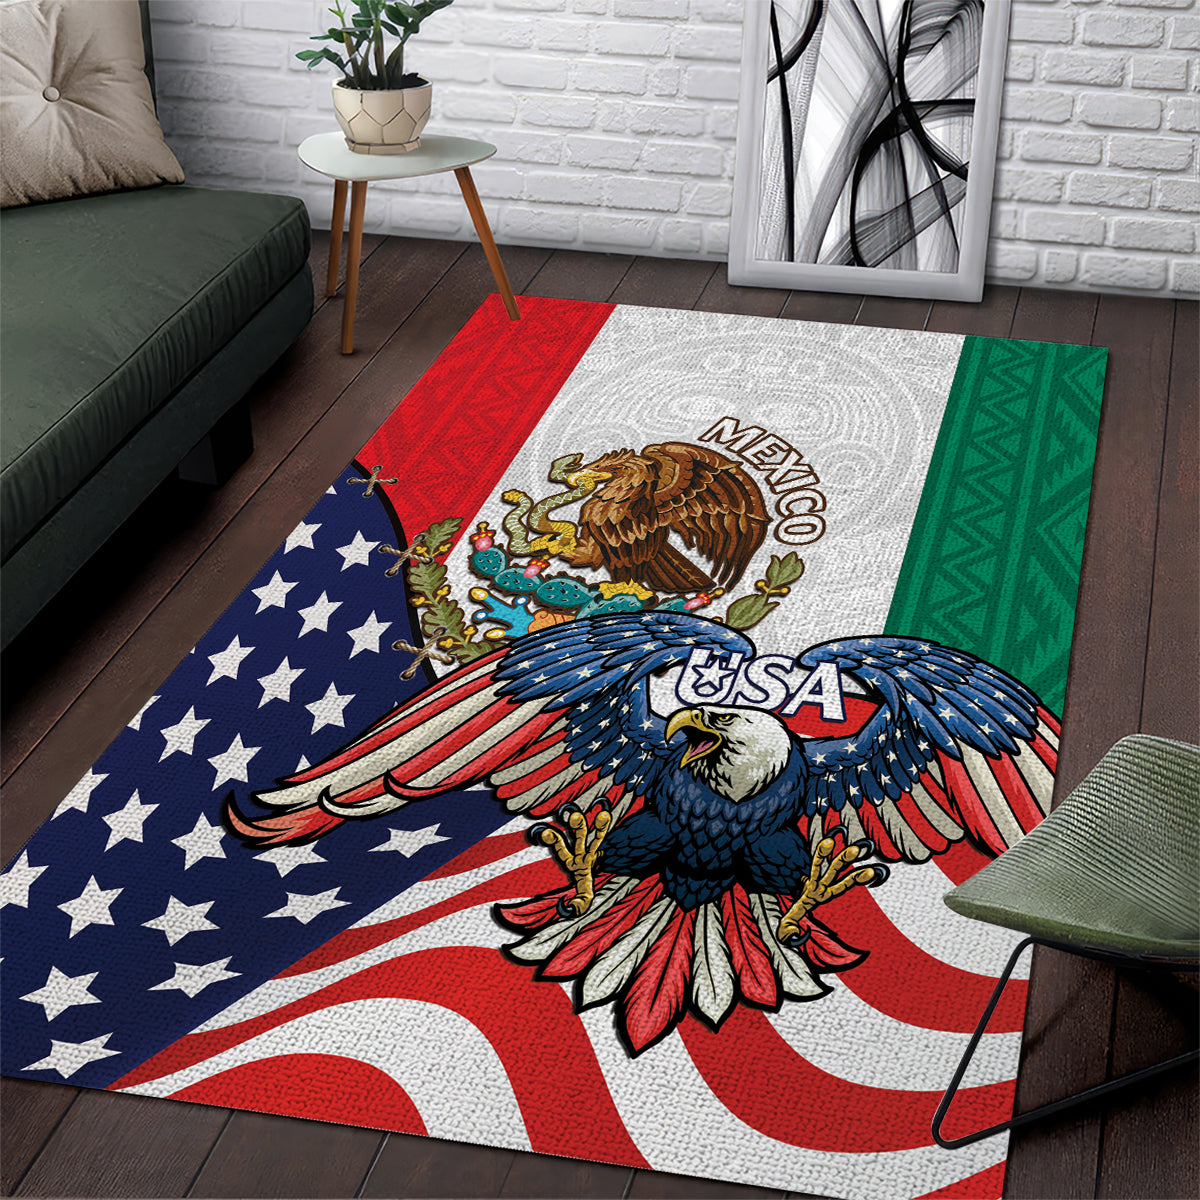 United States And Mexico Area Rug USA Eagle With Mexican Aztec